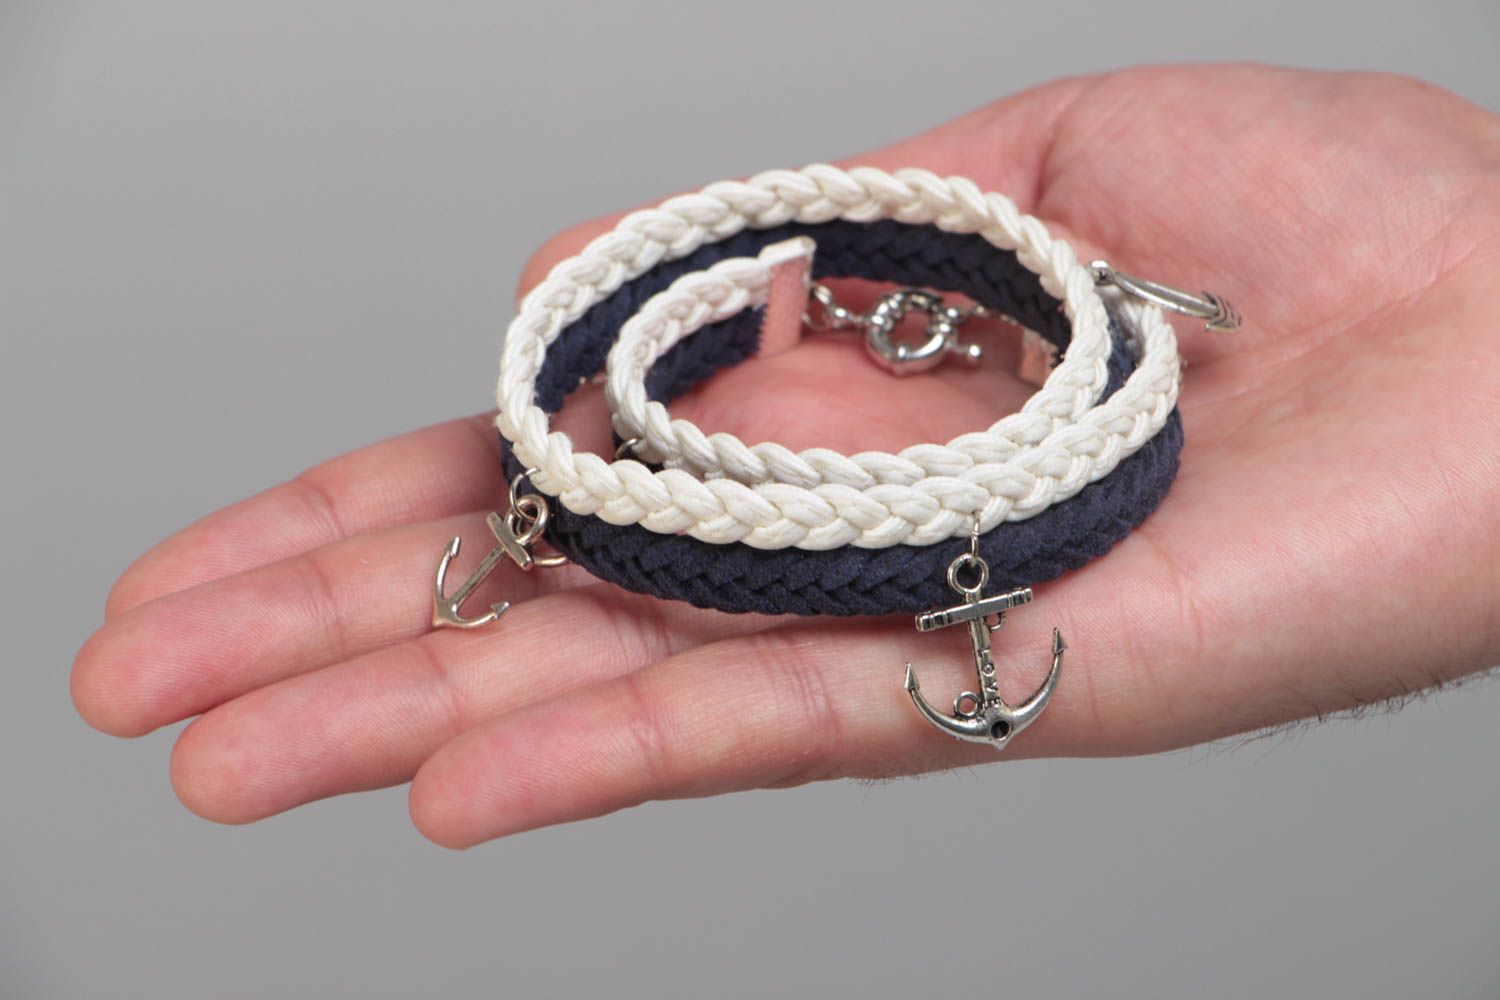 Handmade multi row wrist bracelet woven of suede cord in marine style with charm photo 5